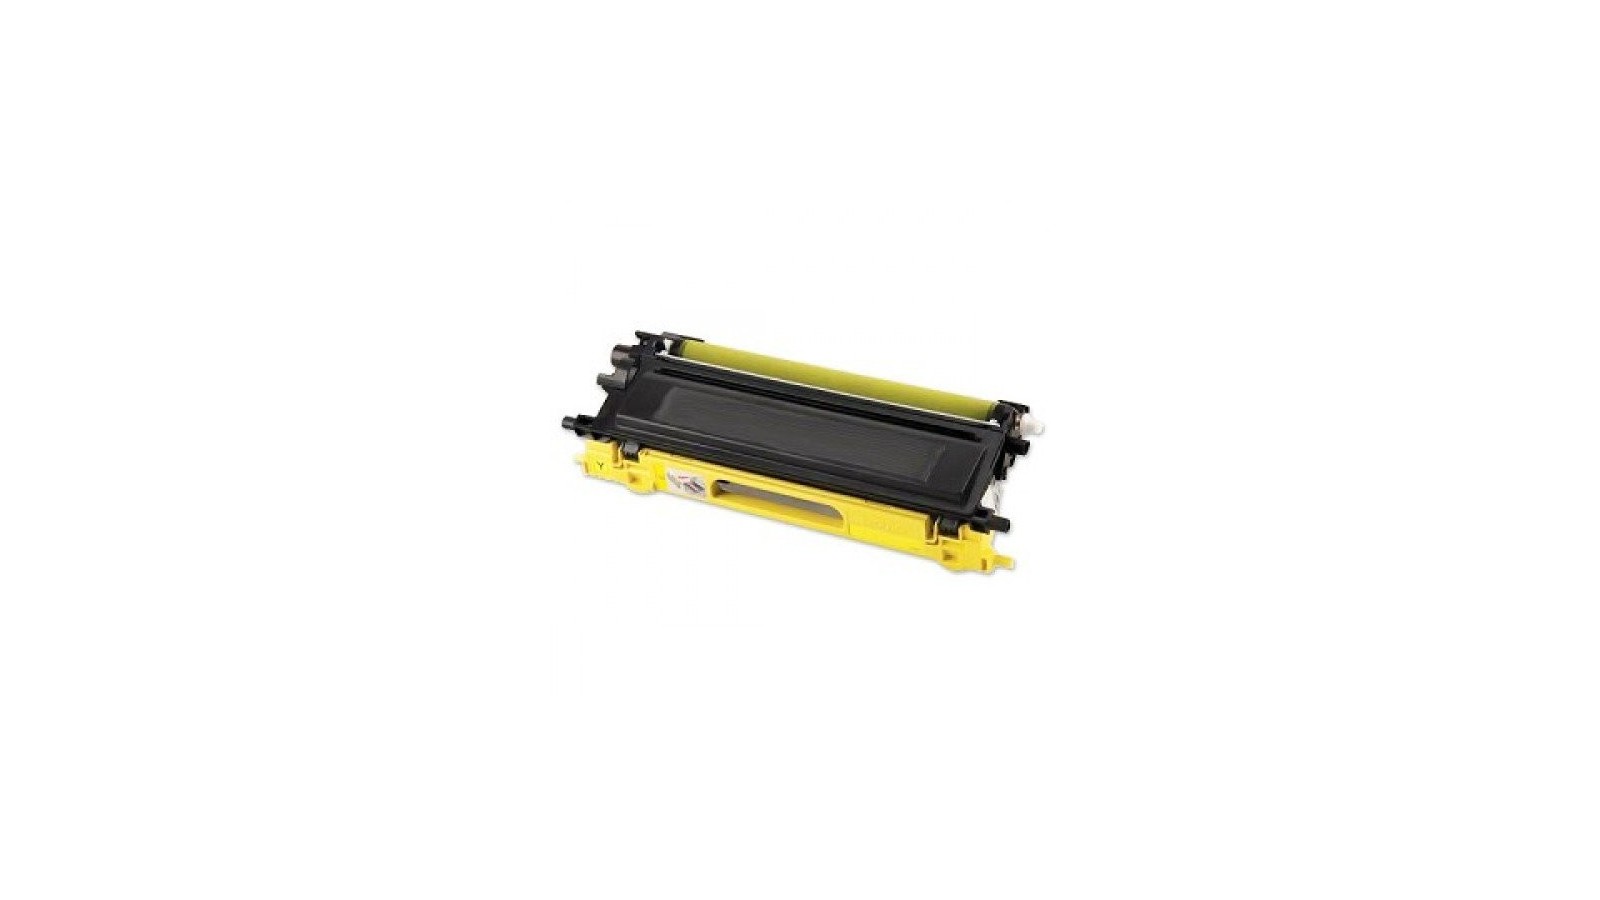 Toner per Brother HL-3040CN HL-3070CW MFC-9010CN MFC-9120CN MFC-9320CW Yellow 1400 Pagine